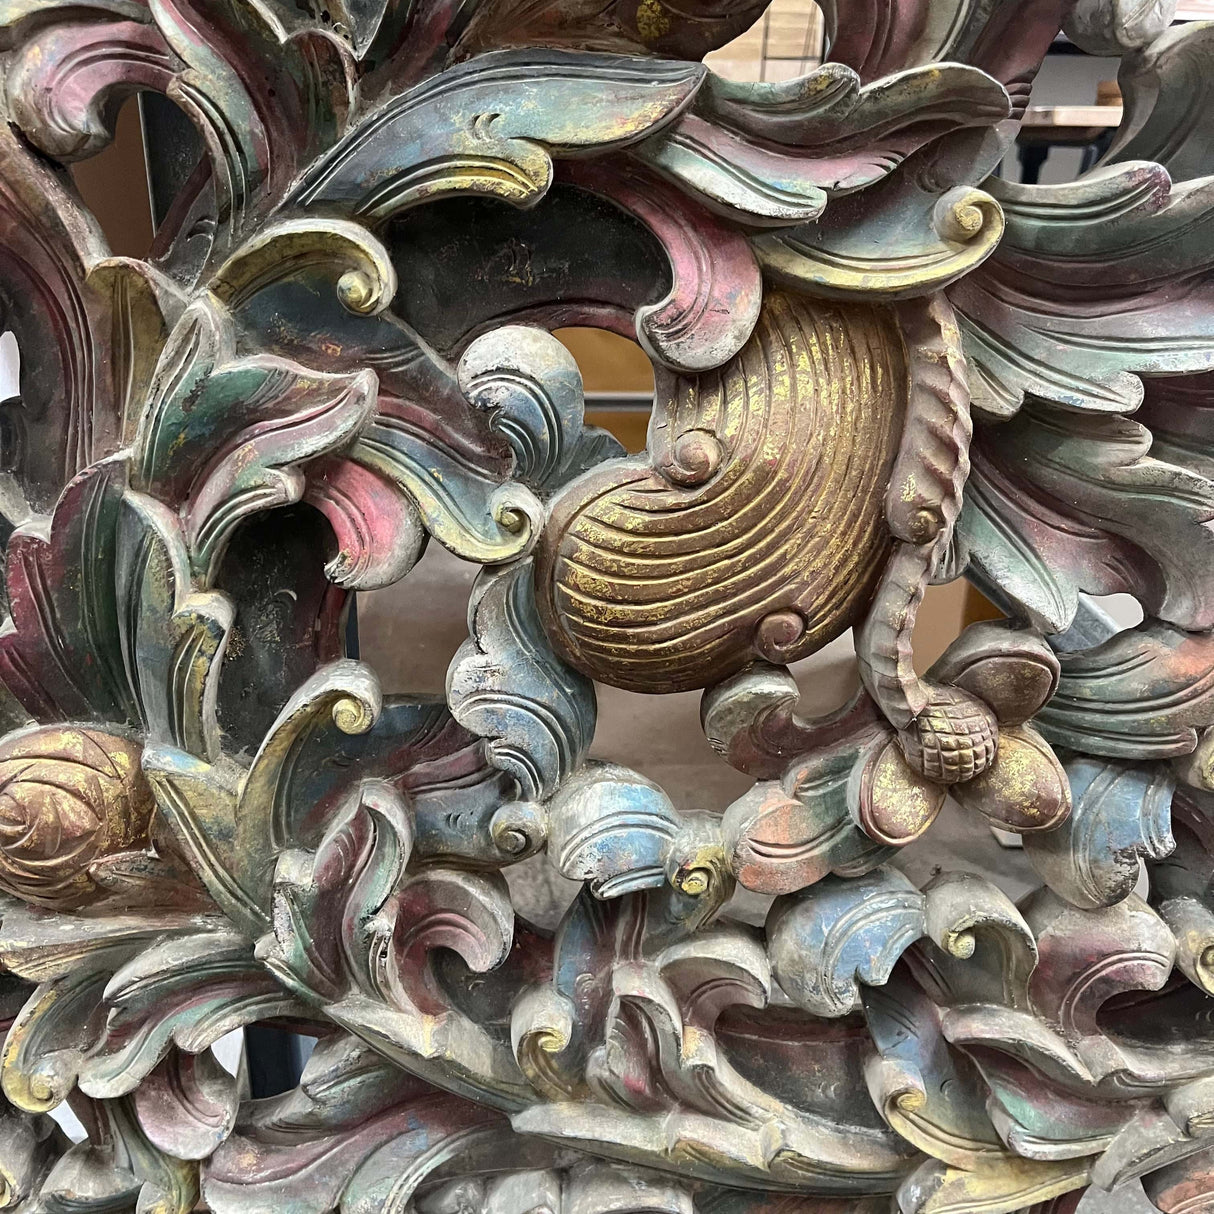 Hand-carved Wall Panel